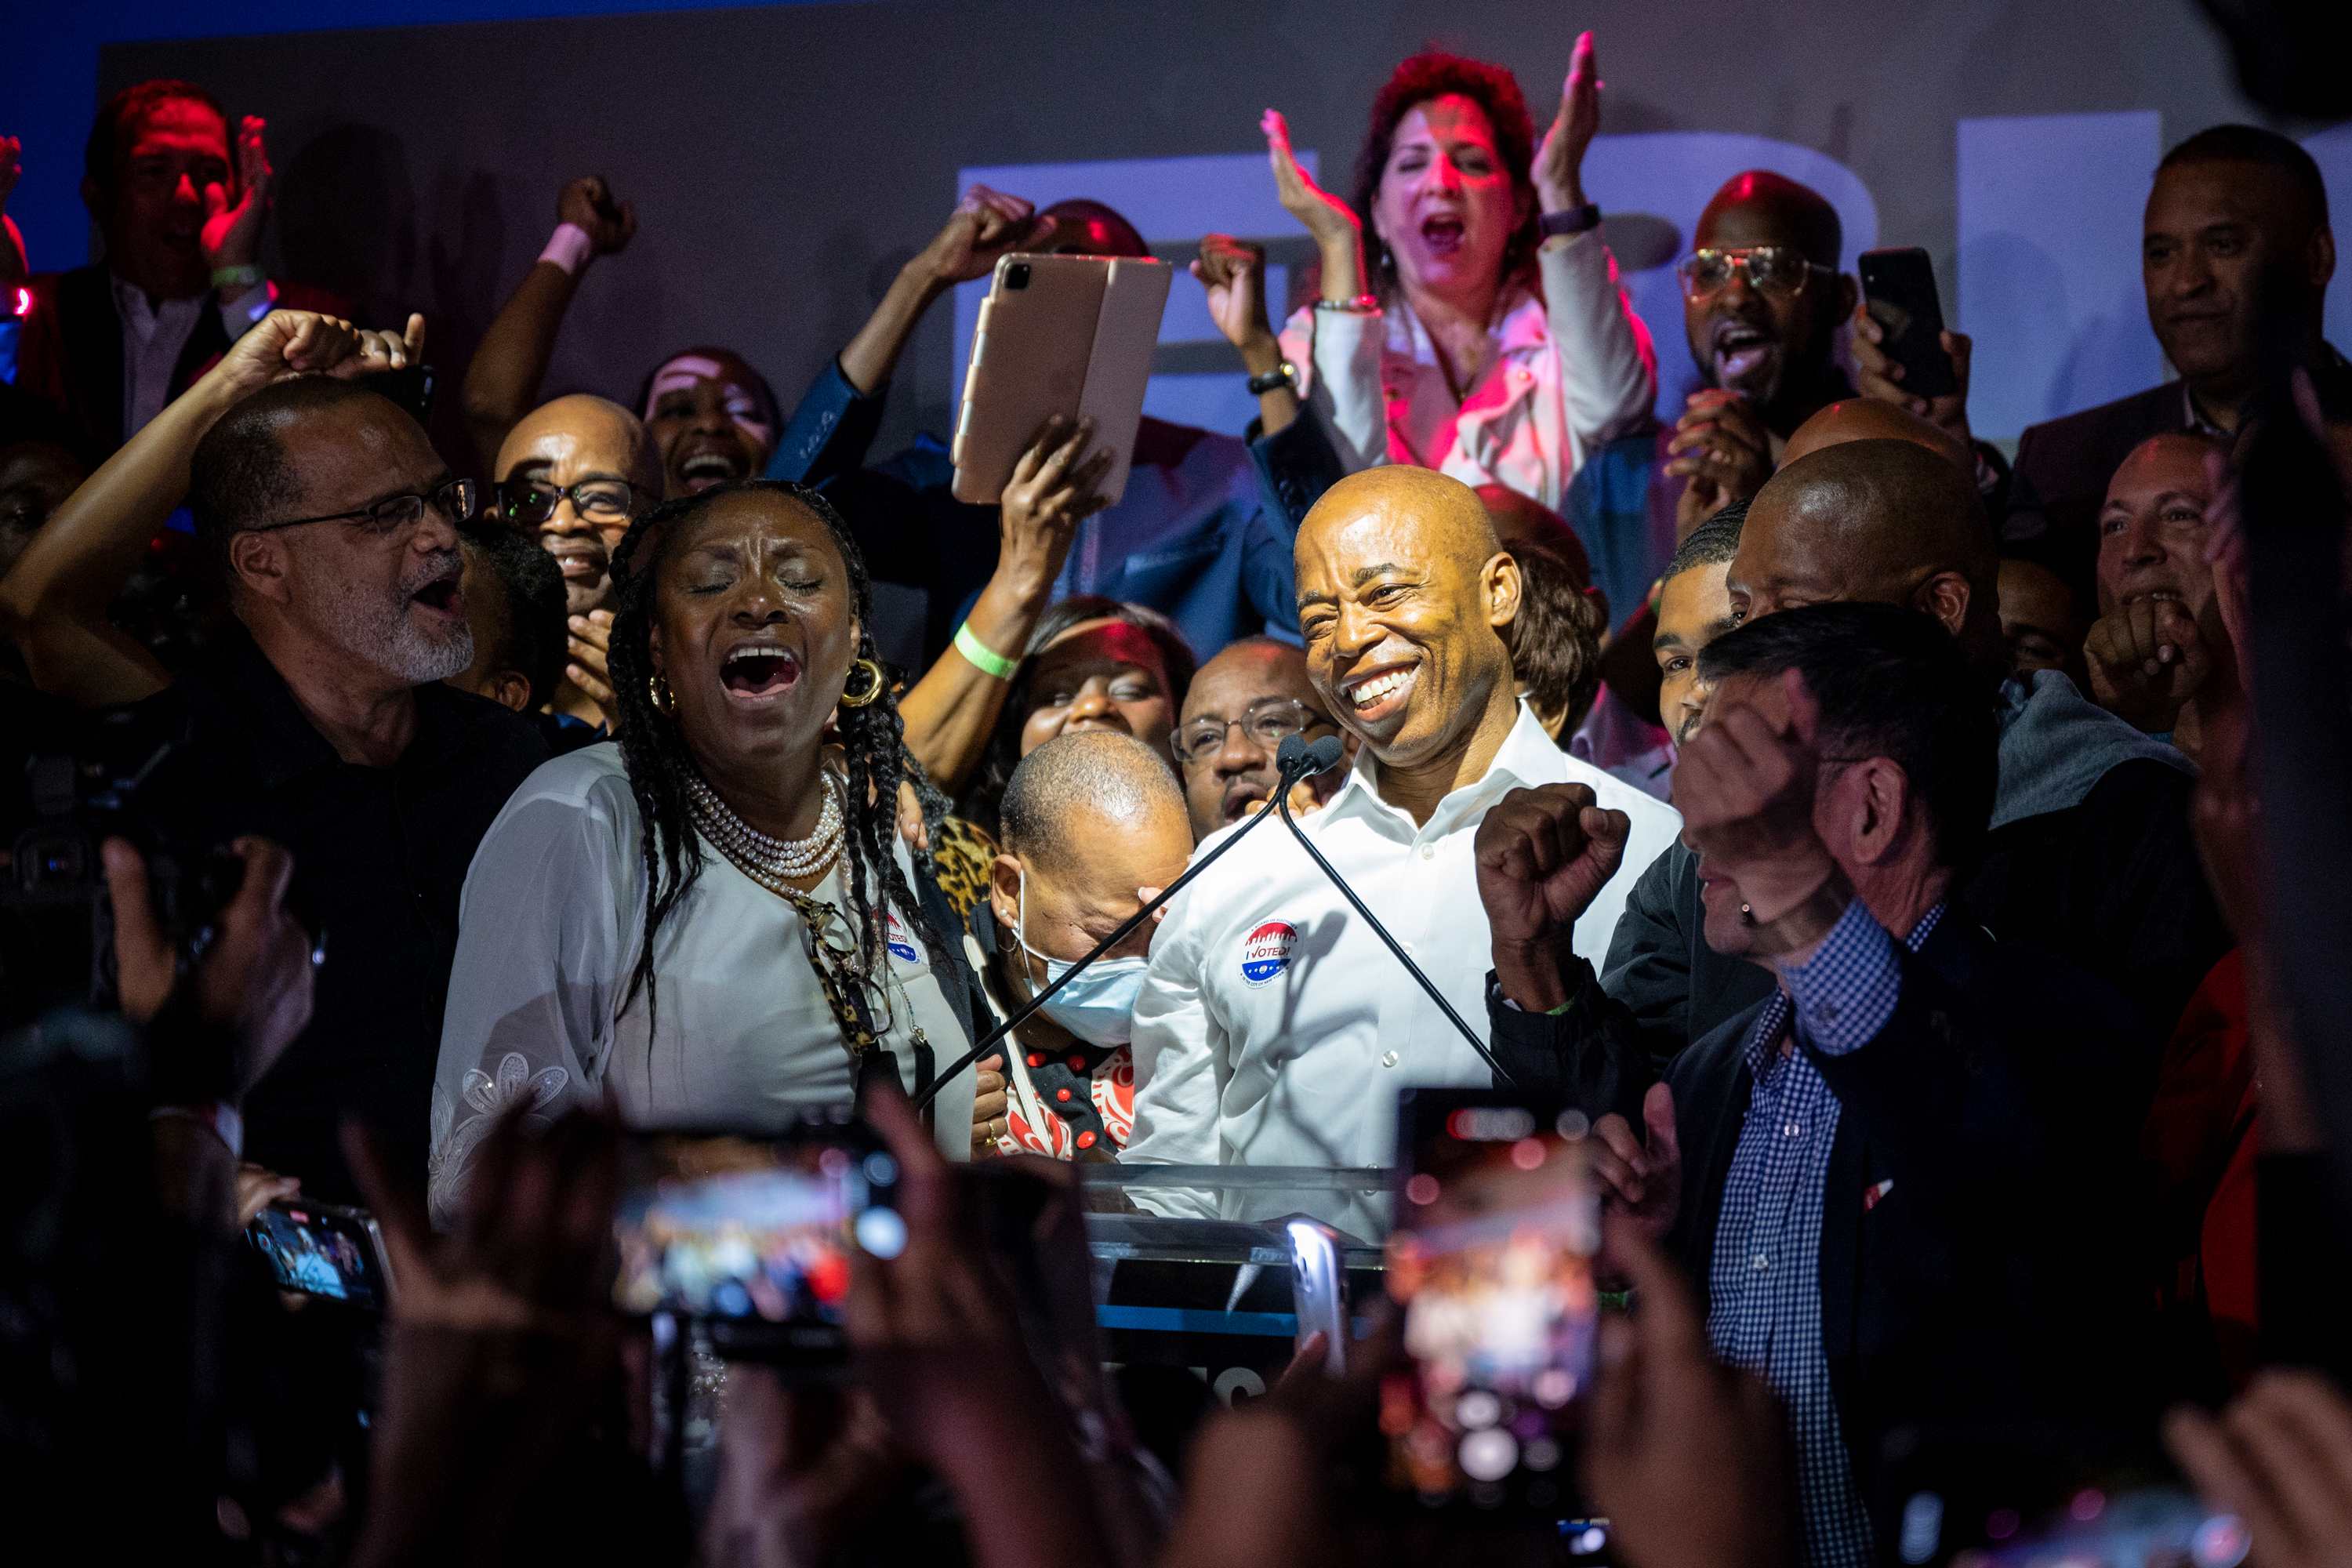 Eric Adams speaks at his election night party in Williamsburg as he took the lead in the mayoral primary, June 22, 2021.